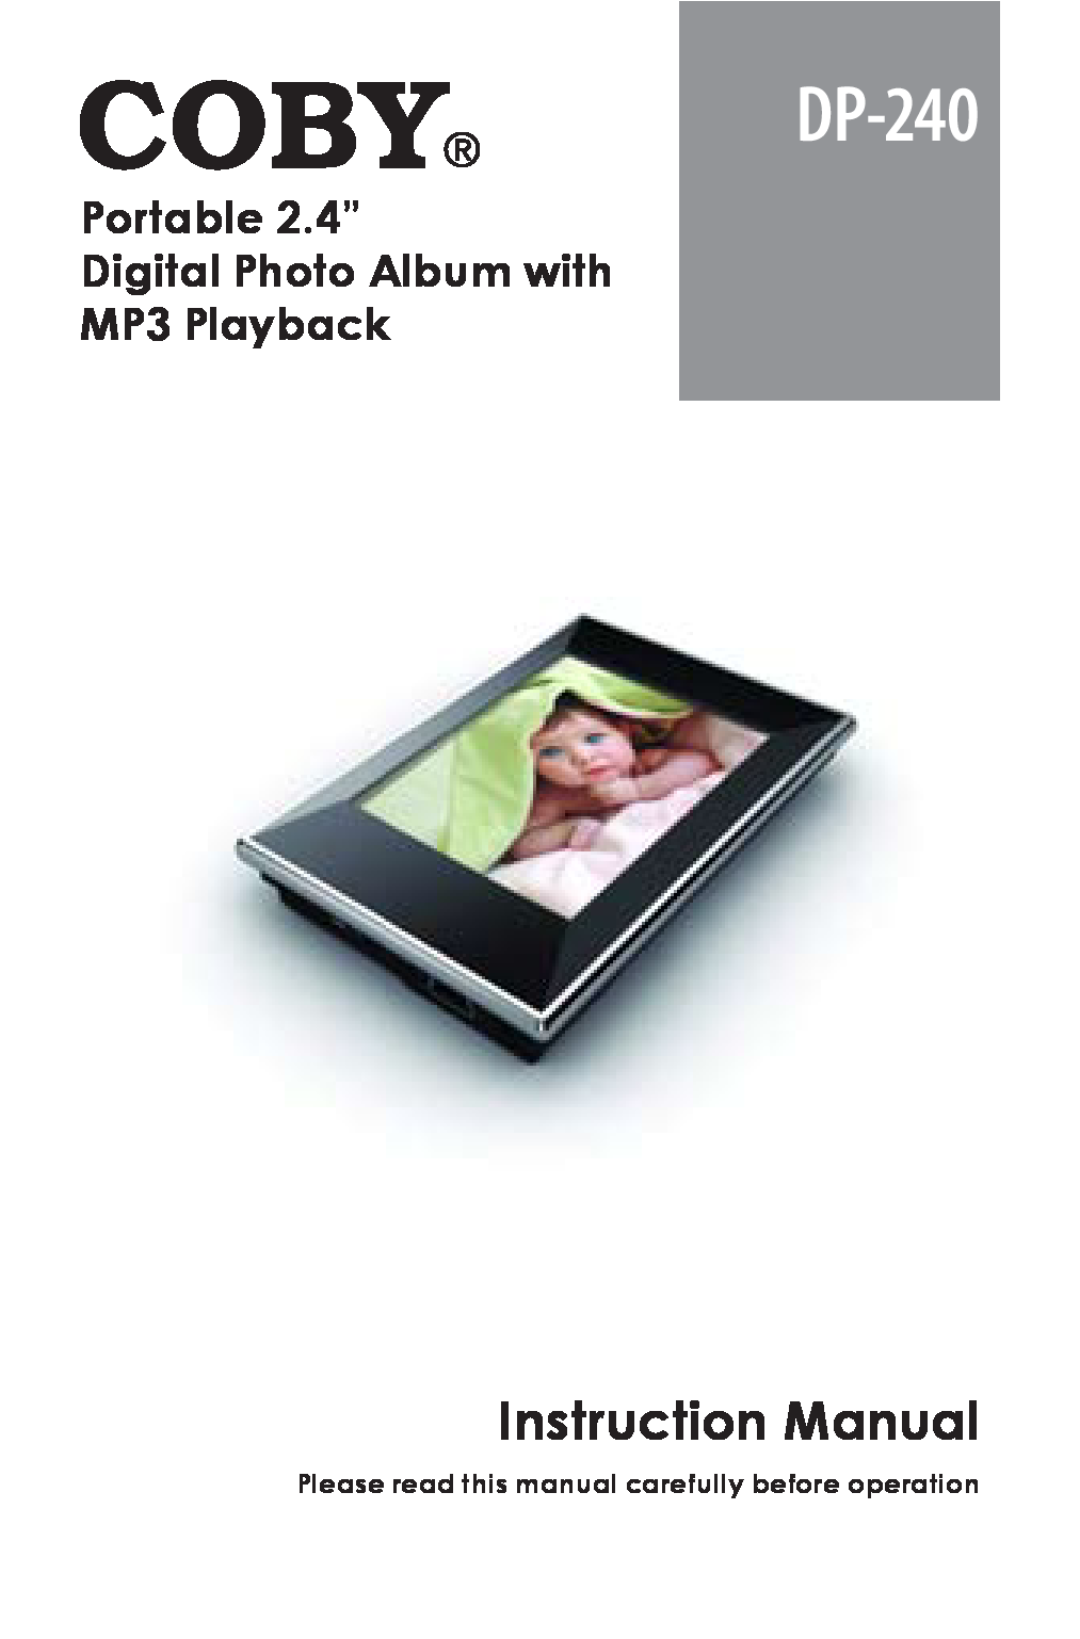 COBY electronic DP-240 instruction manual Portable 2.4” Digital Photo Album with MP3 Playback, Instruction Manual 